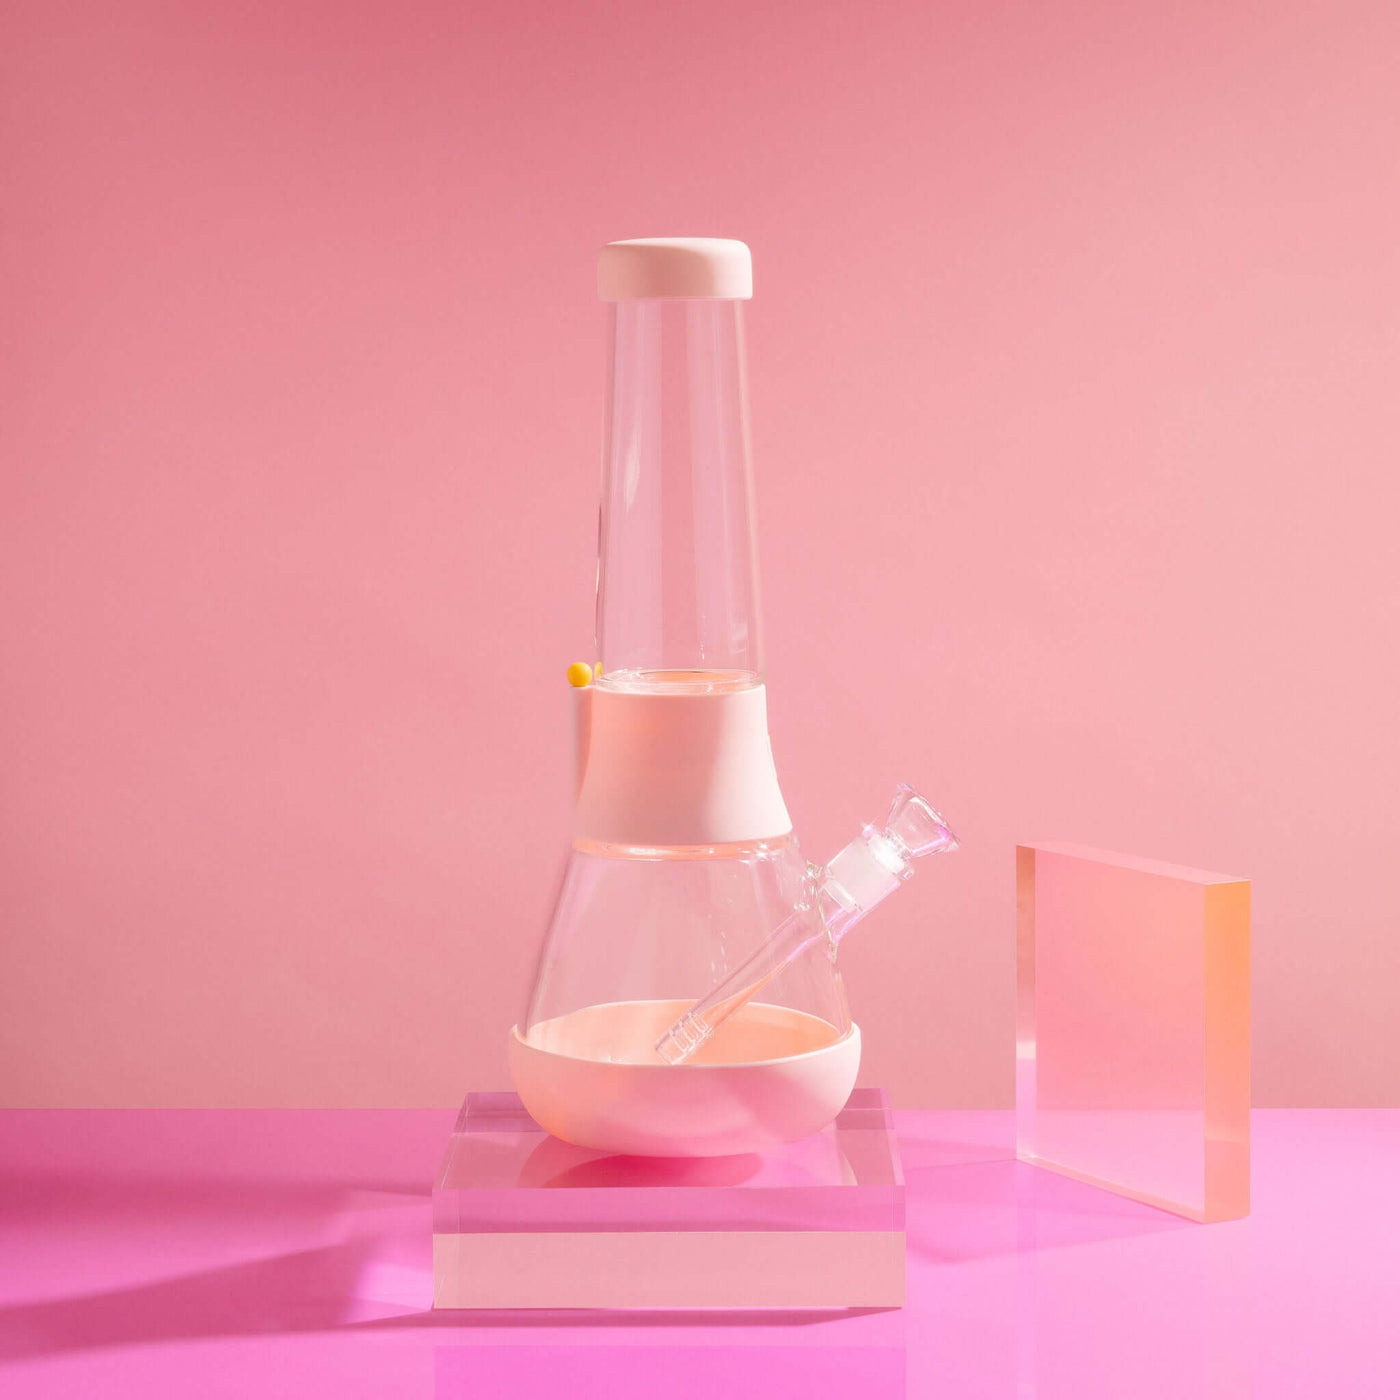 Product photo of sleek glass bong on baby pink cover in a pink setting, with glowy acrylic glass beside it.